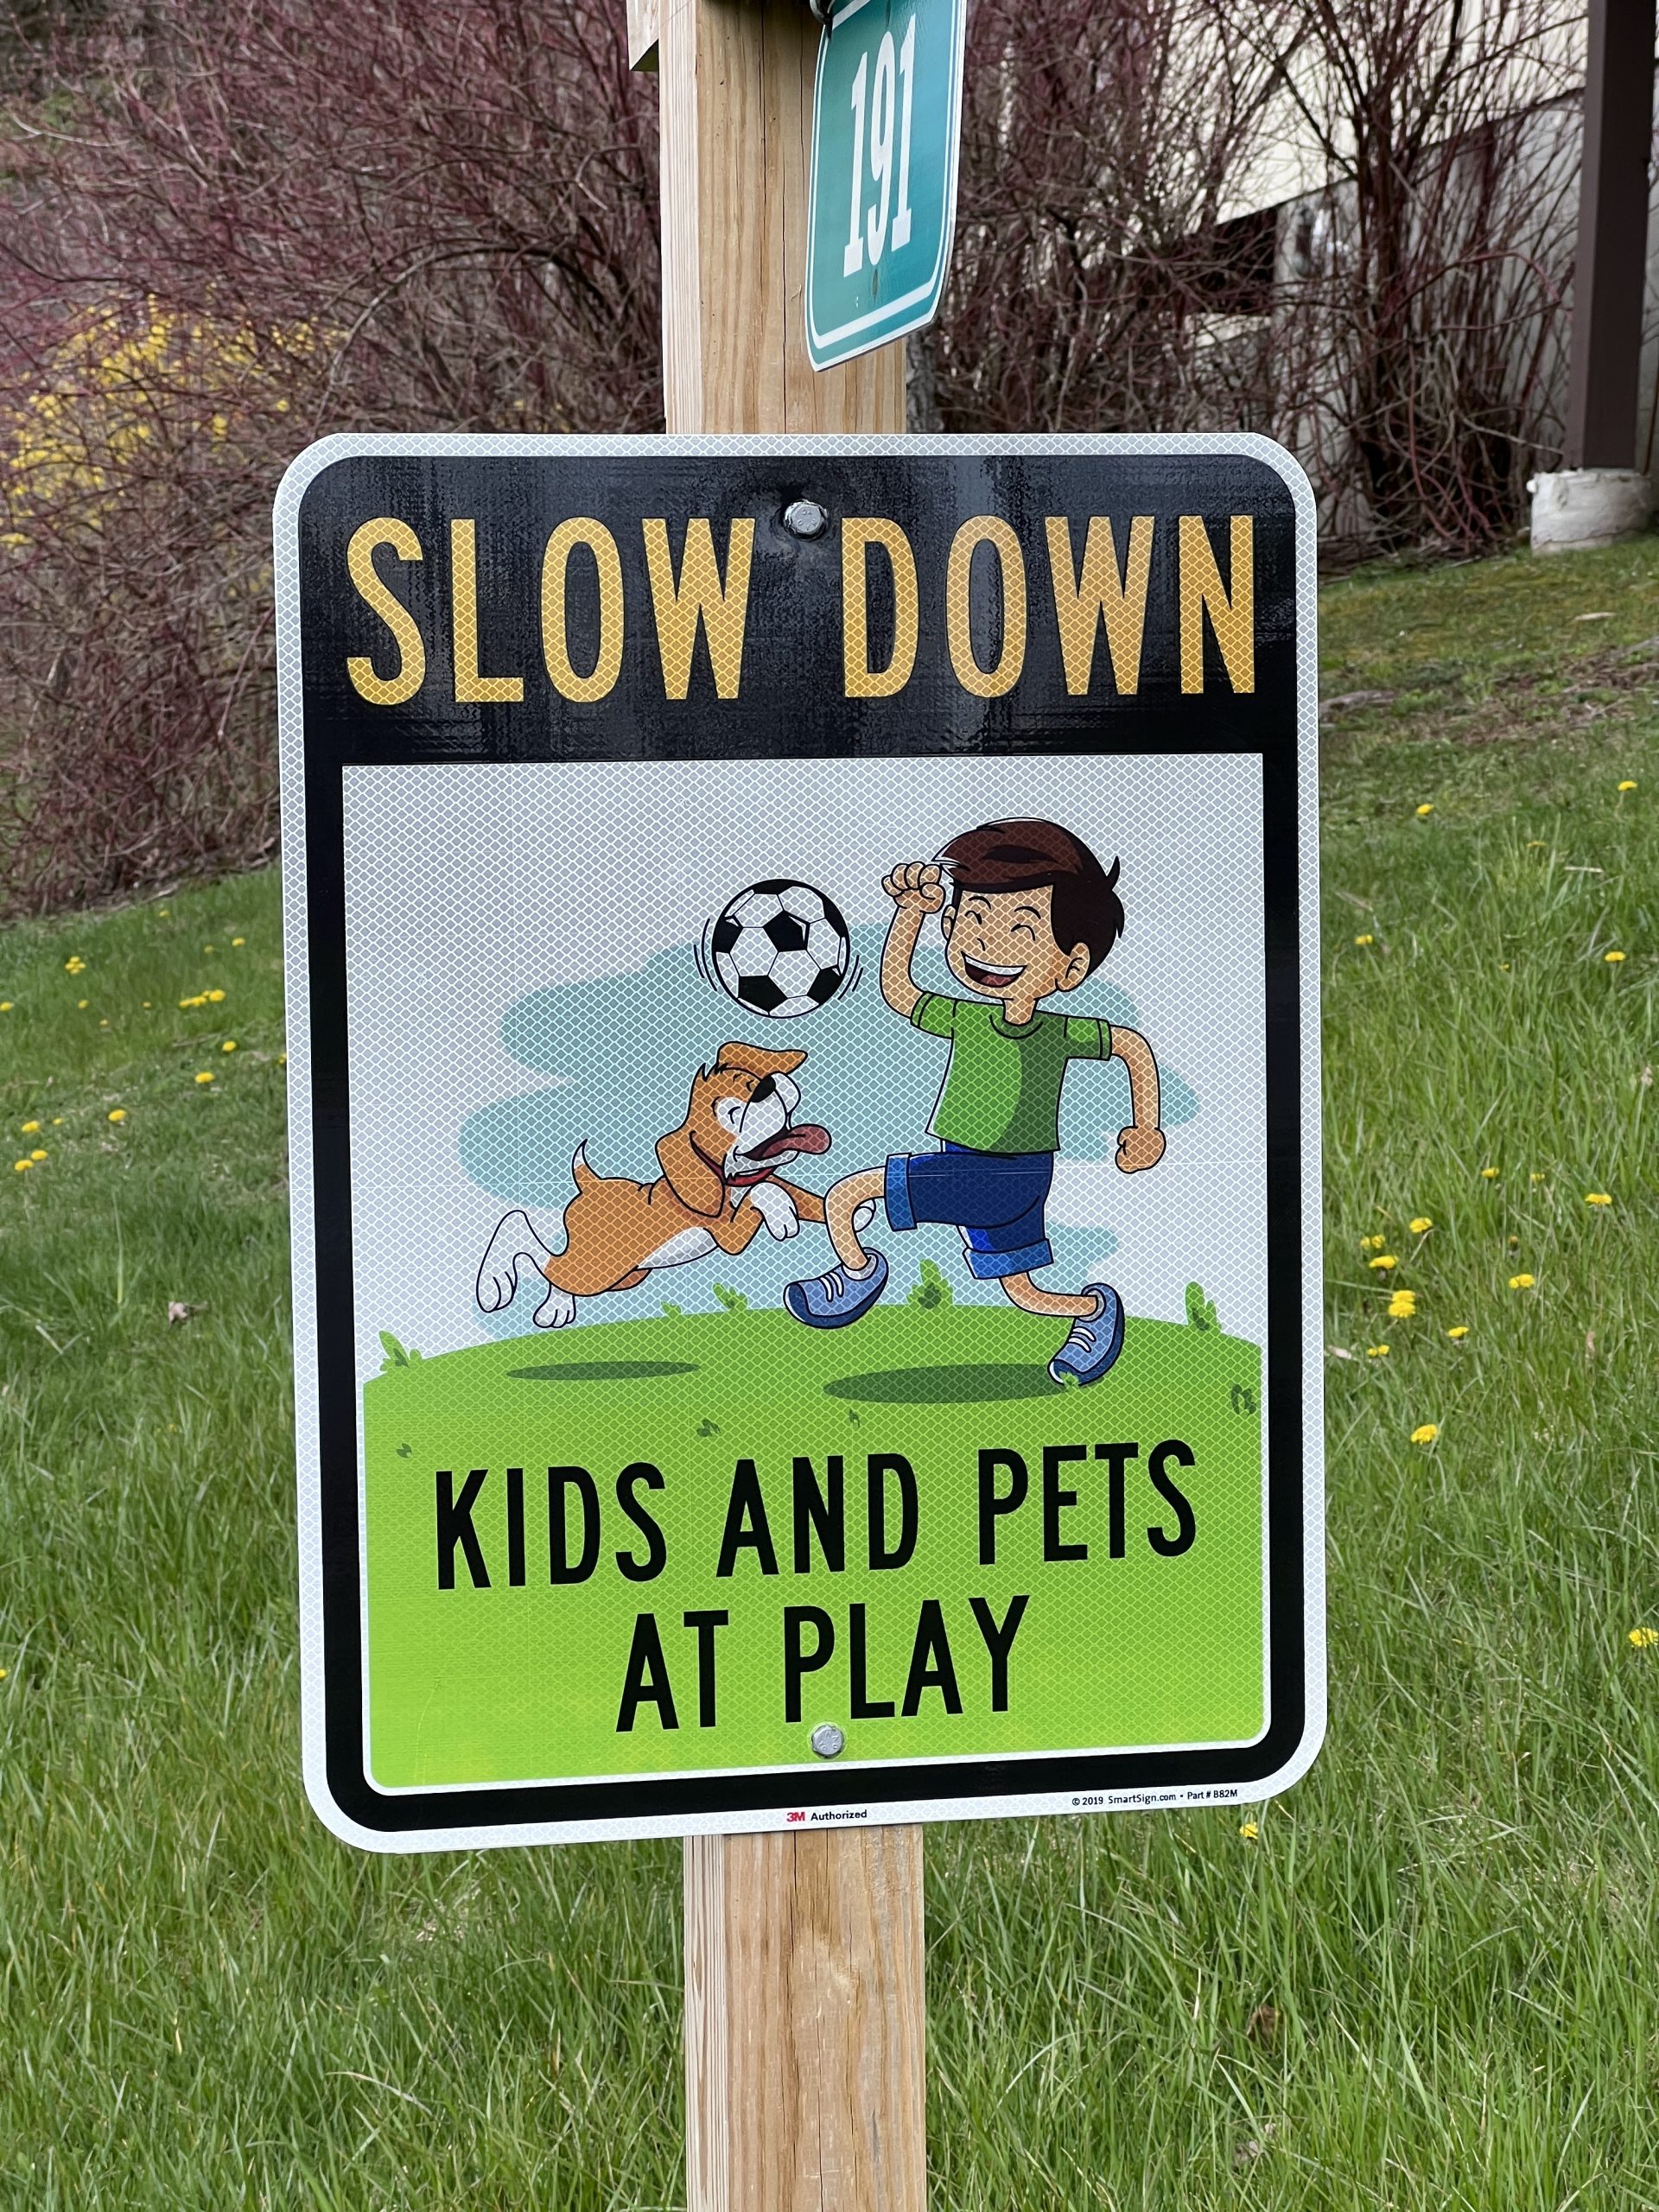 Road sign on a wooden post: Slow Down - Kids and Pets at play